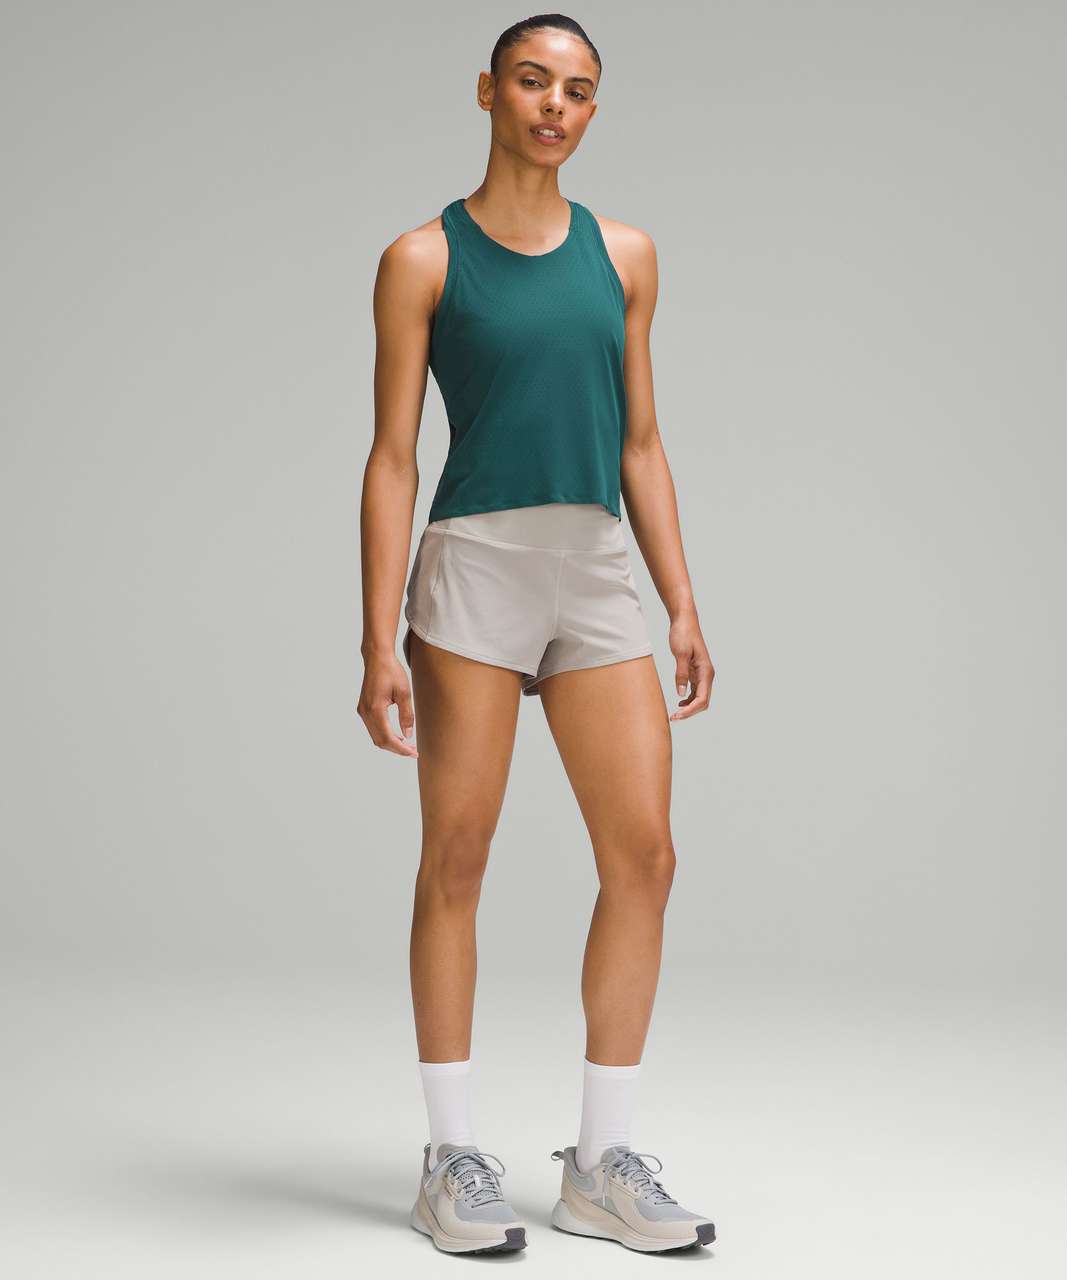 Lululemon Fast and Free Race Length Tank Top - Storm Teal